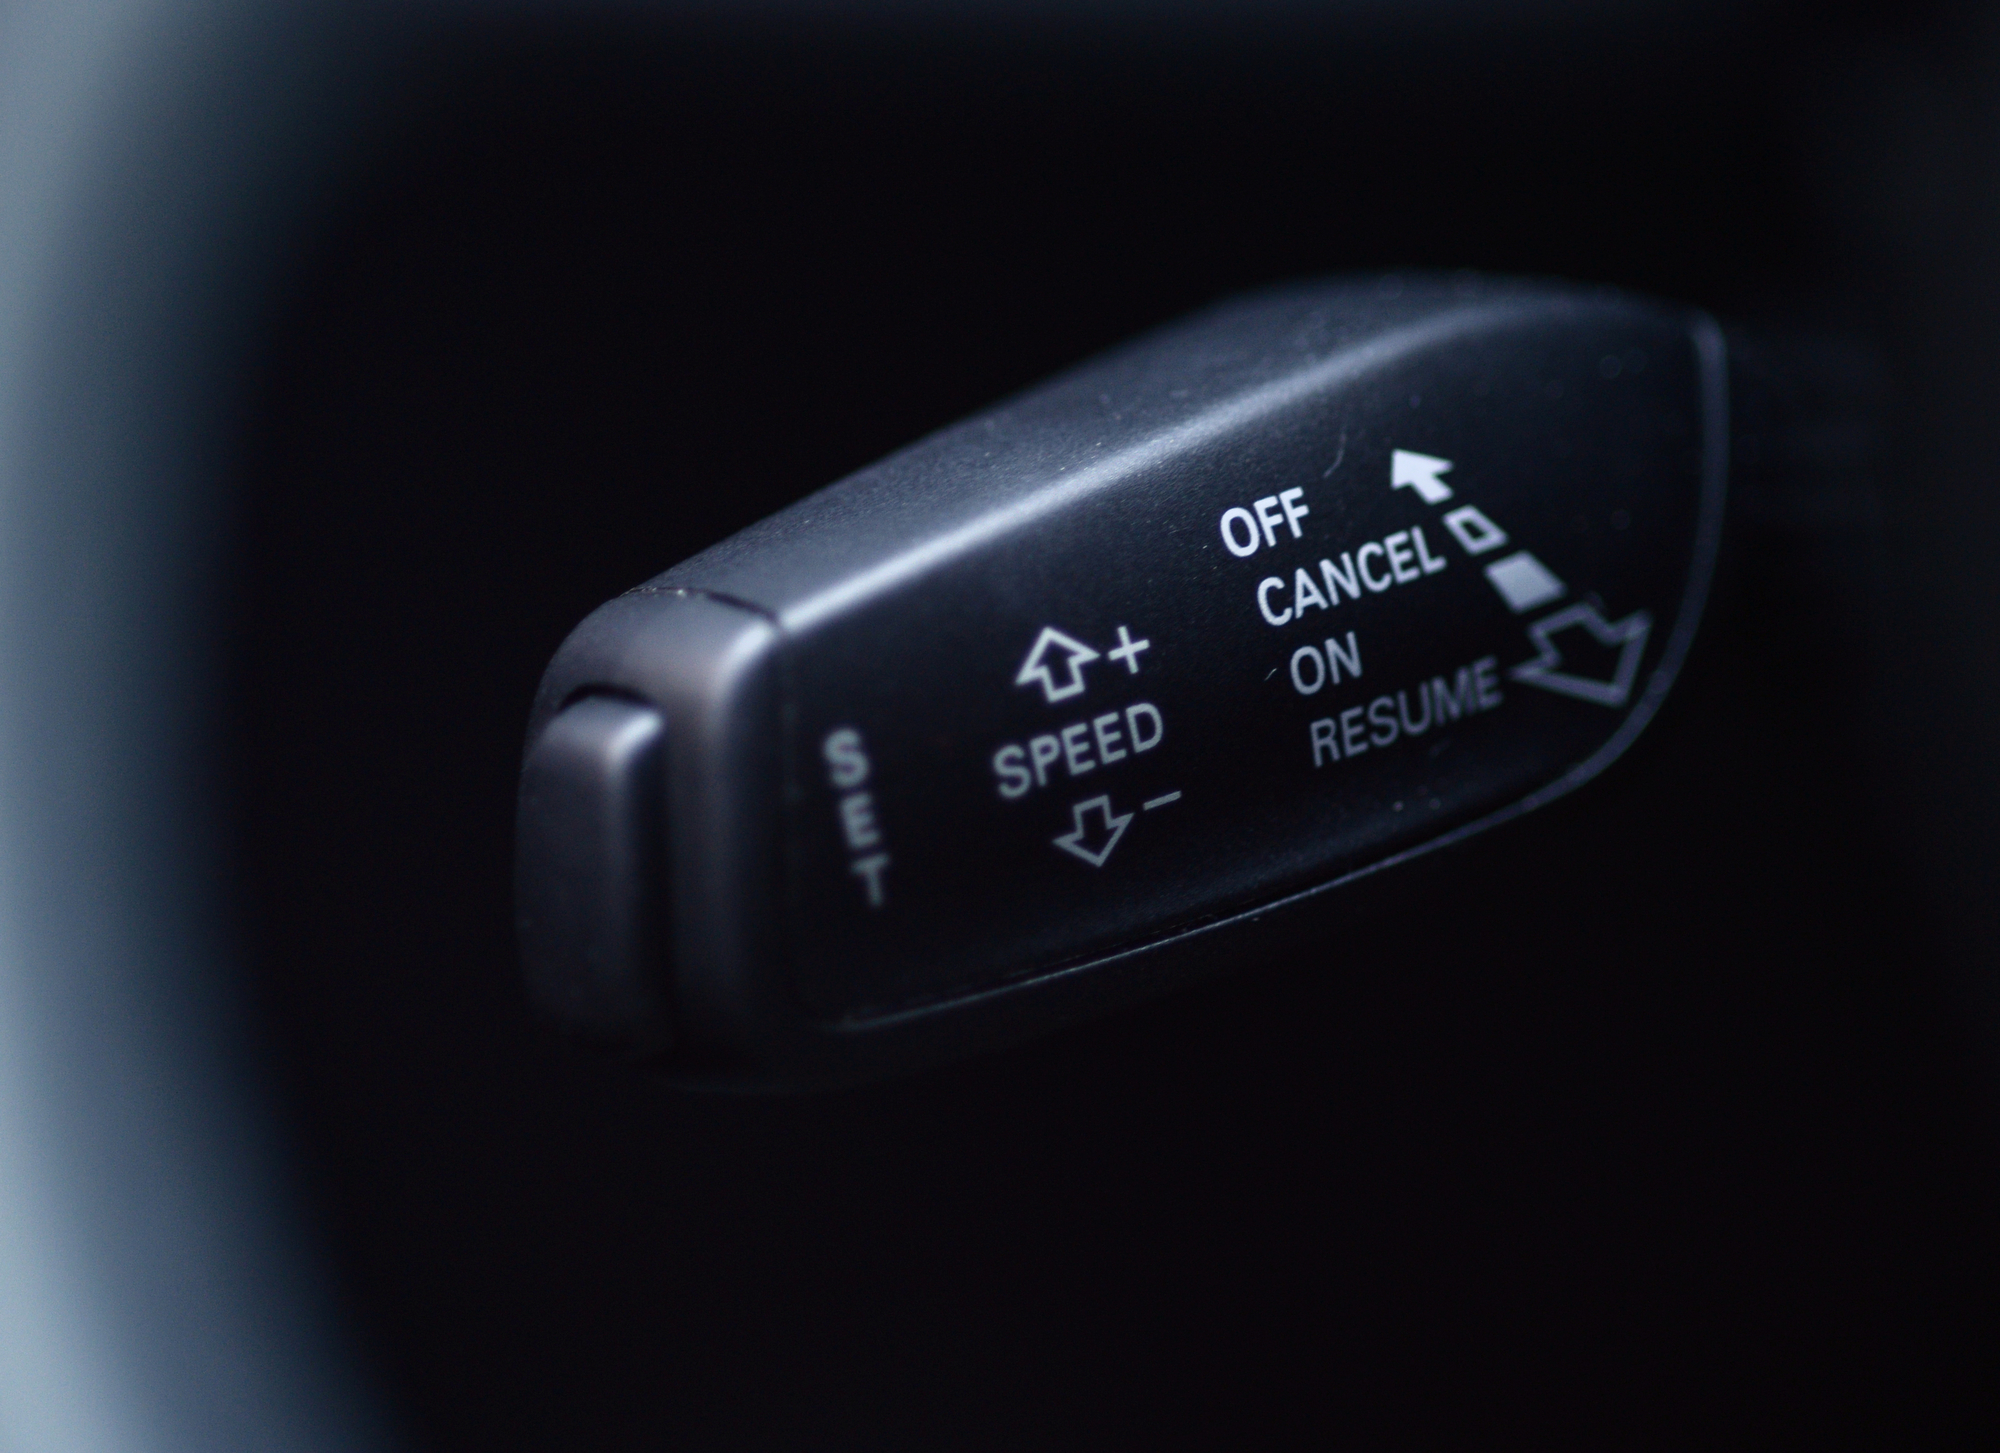 A cruise control stalk used for operating adaptive cruise control